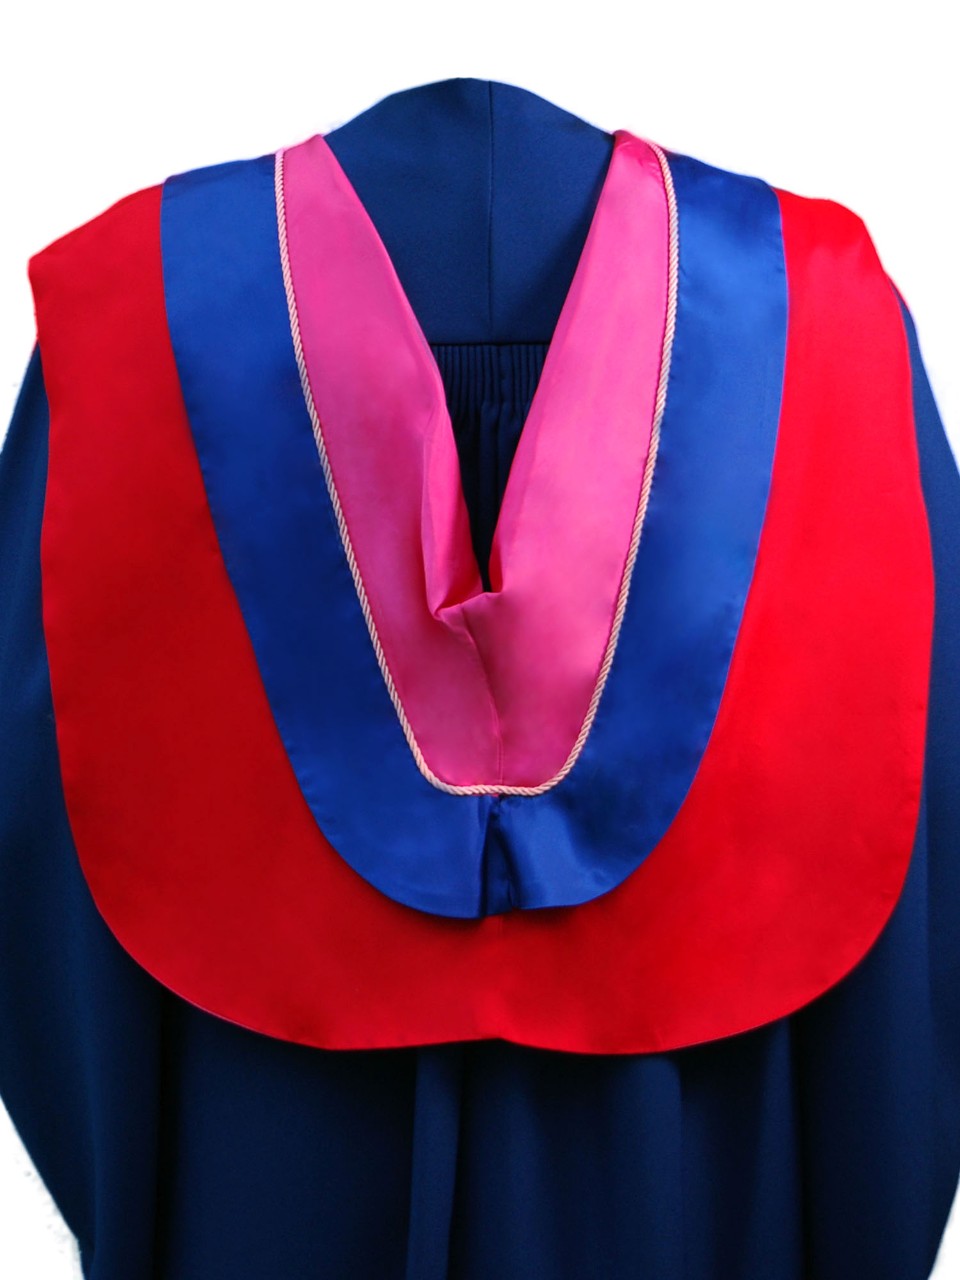 The Master of Fine Arts hood is red with wide blue border, pink cording and cerise underside